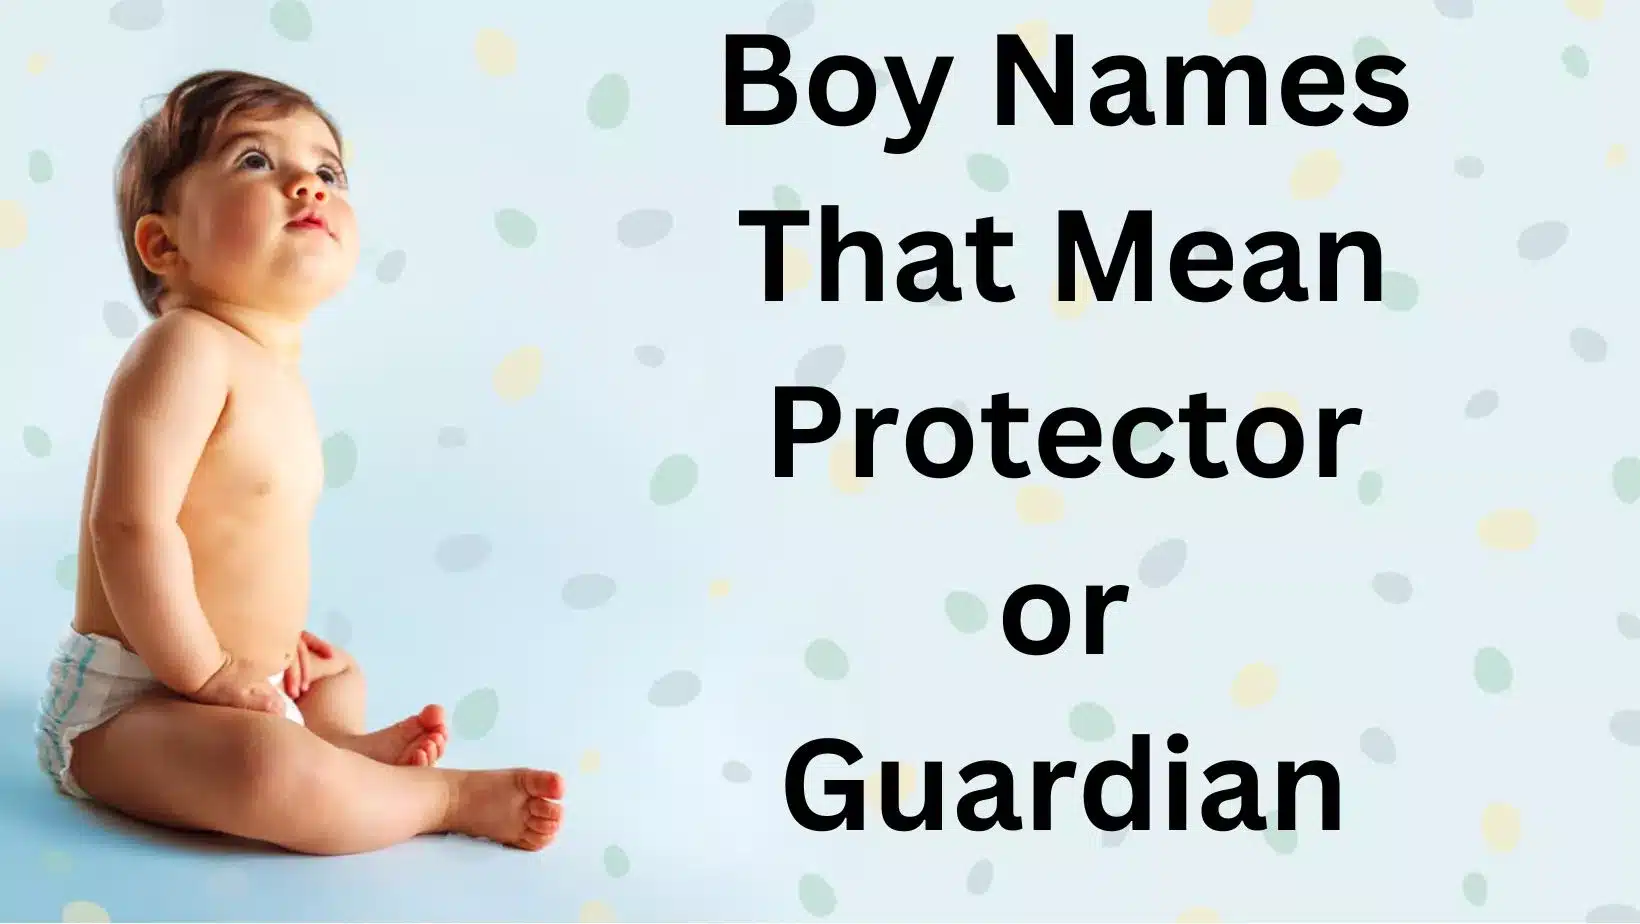 Boy Names That Mean Protector or Guardian